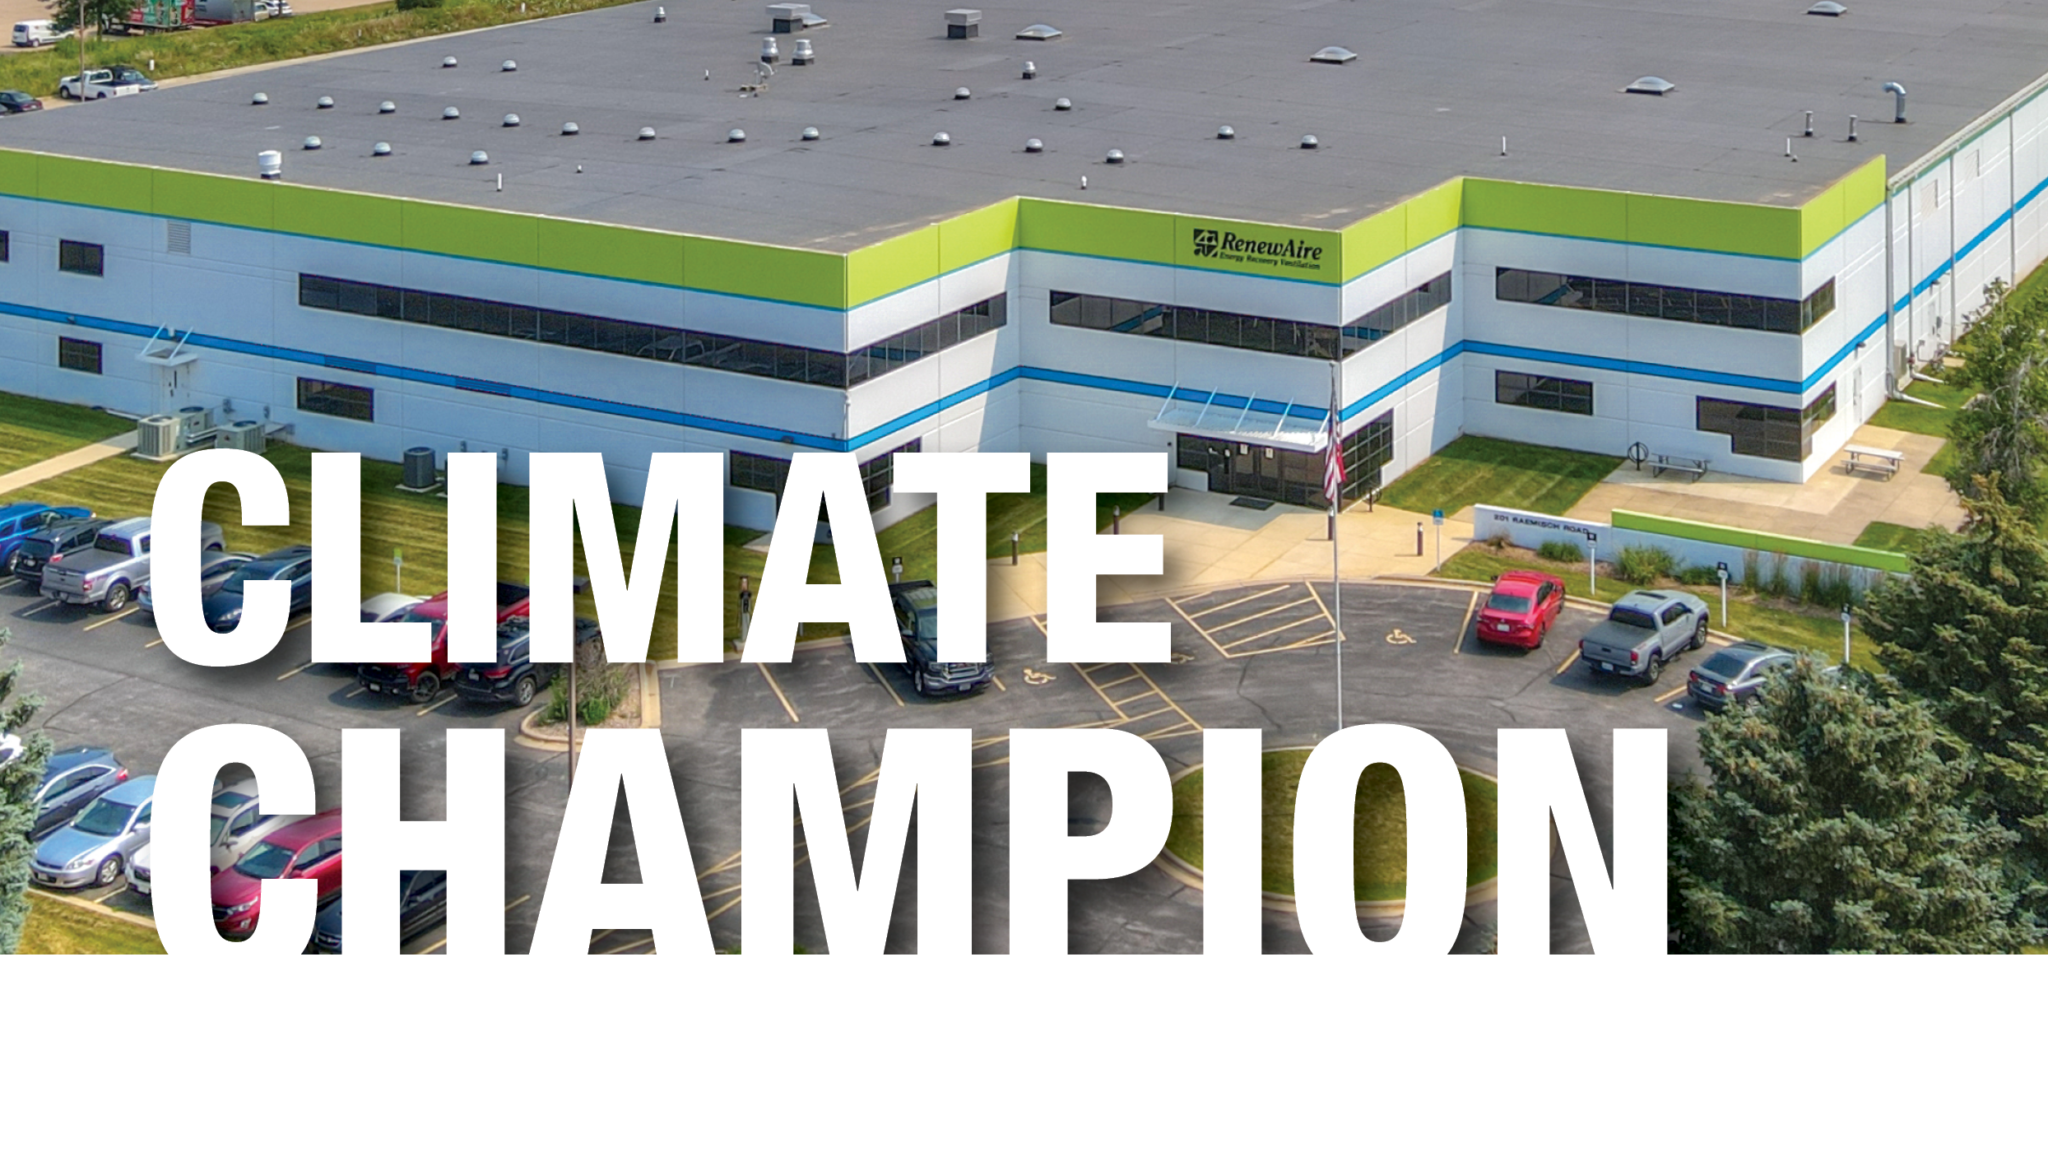 RENEWAIRE’S HEADQUARTERS WINS CLIMATE CHAMPION AWARD FOR SUSTAINABILITY & ENERGY EFFICIENCY